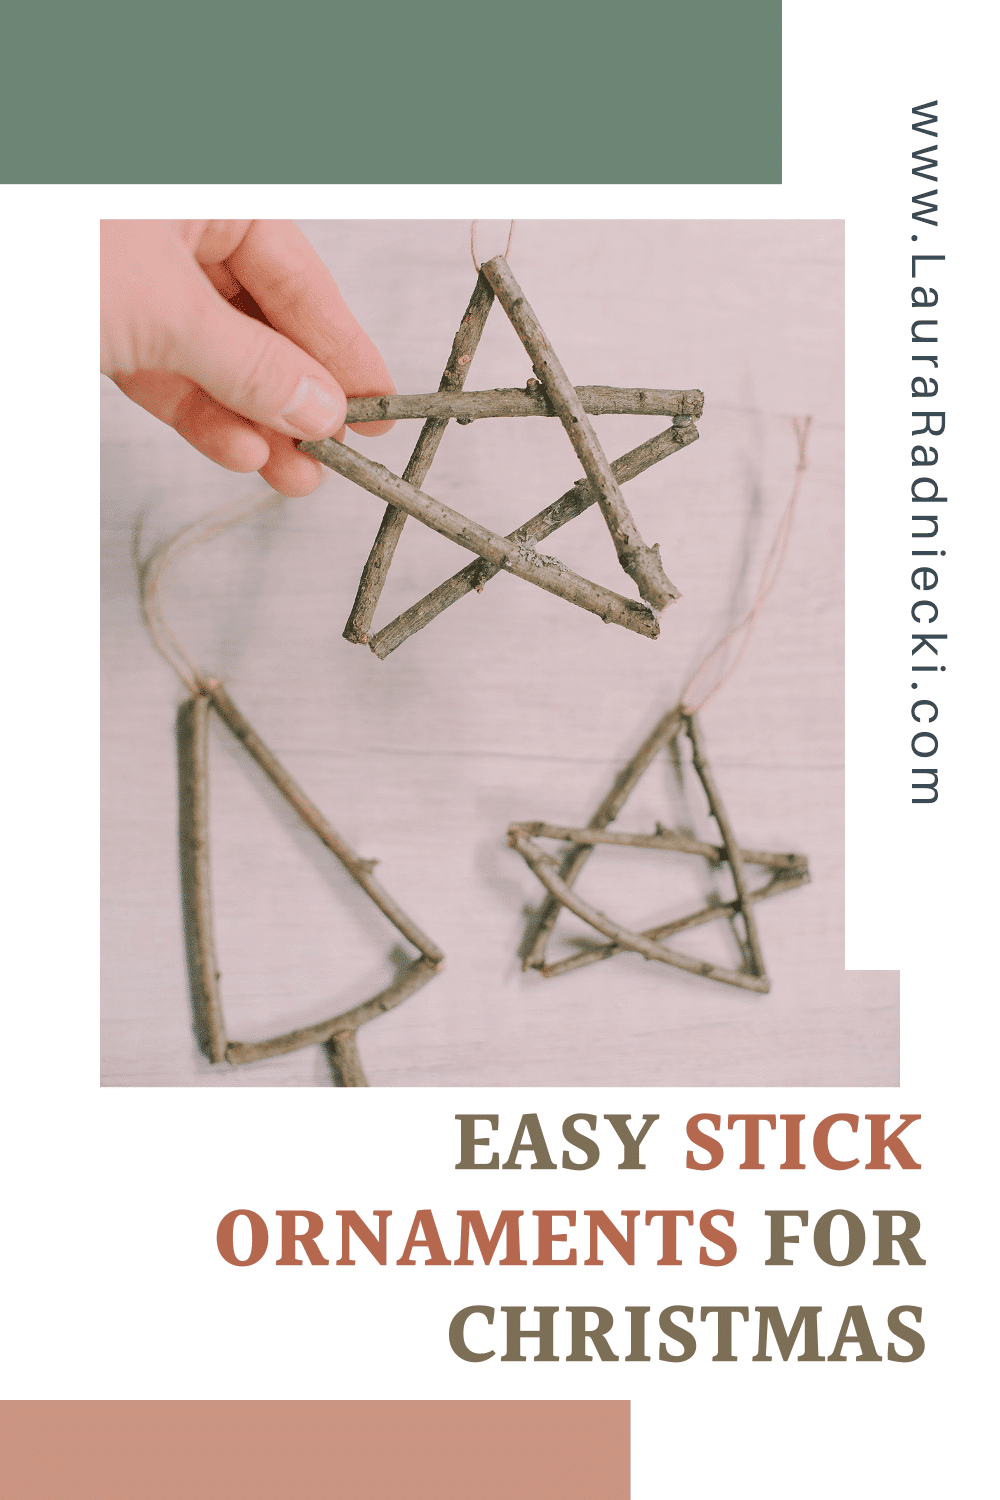 How to Make Stick Christmas Ornaments